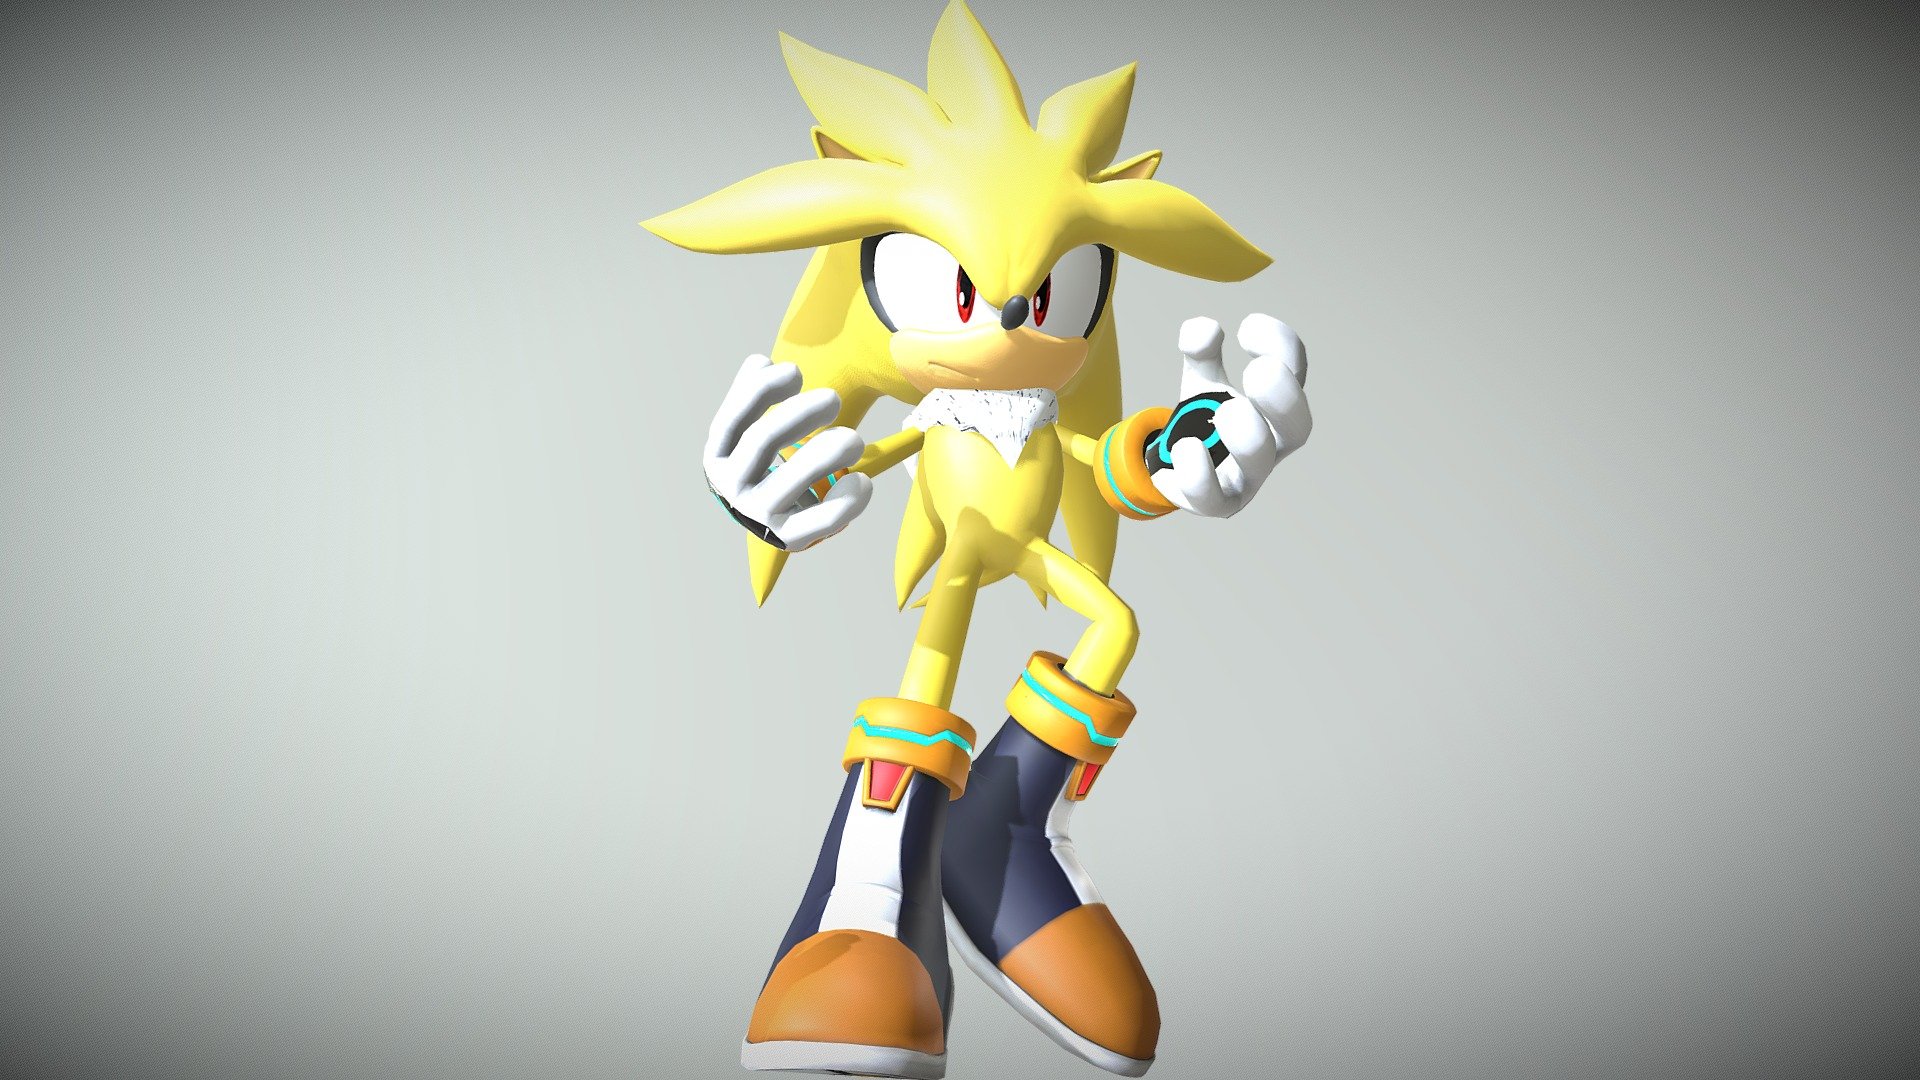 Xbox 360 - Sonic the Hedgehog (2006) - Super Shadow - The Models